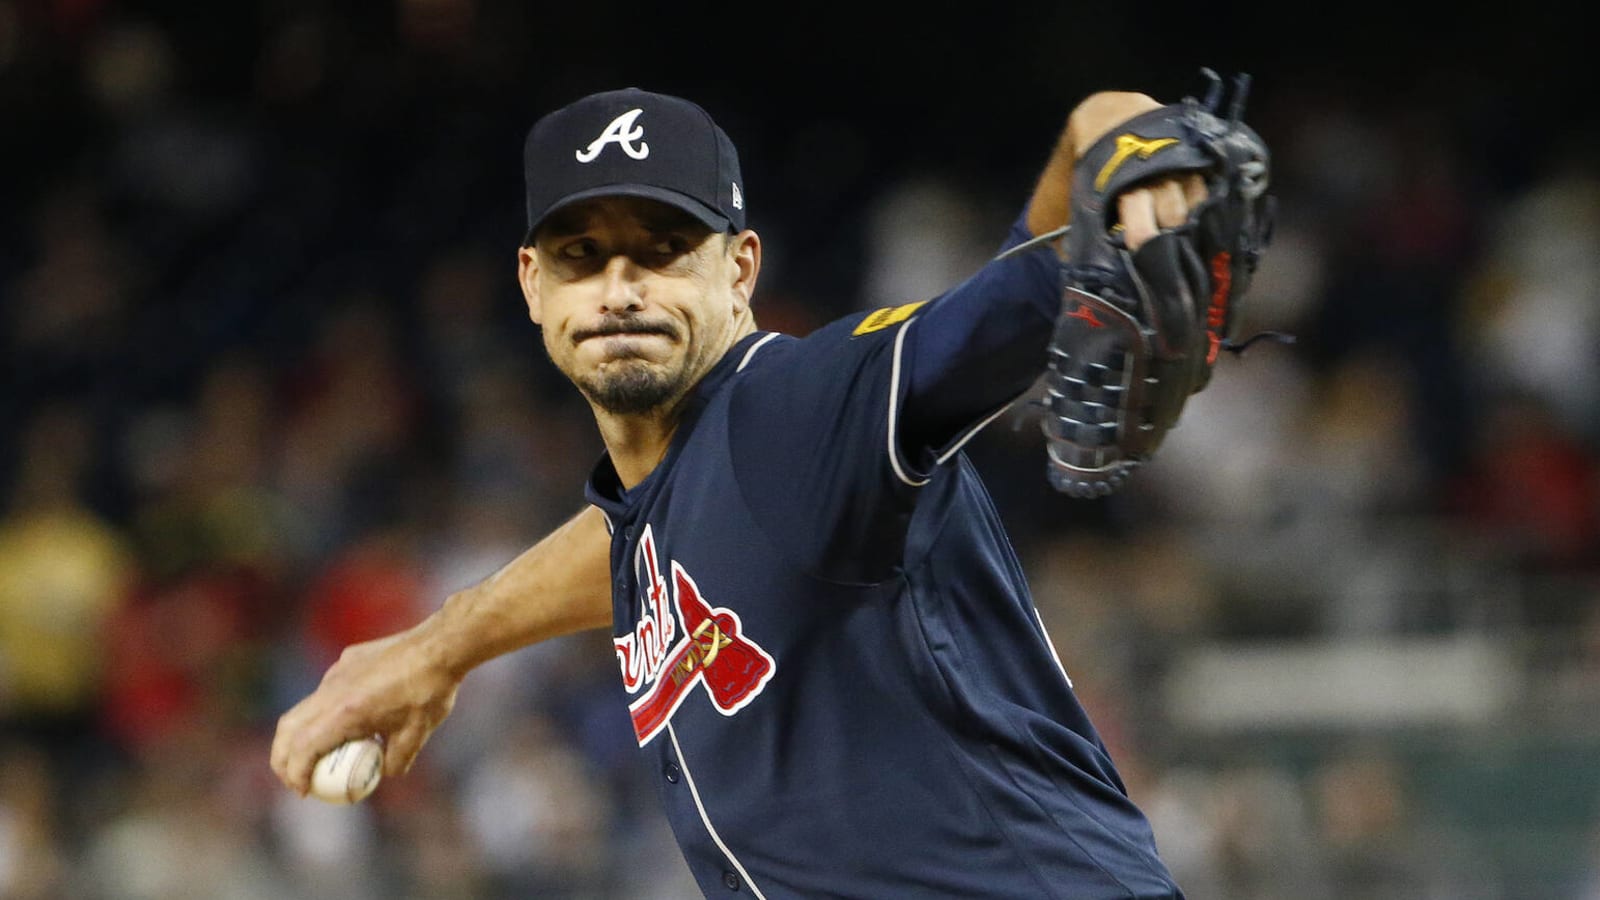 Braves veteran righty placed on IL, unavailable for NLDS